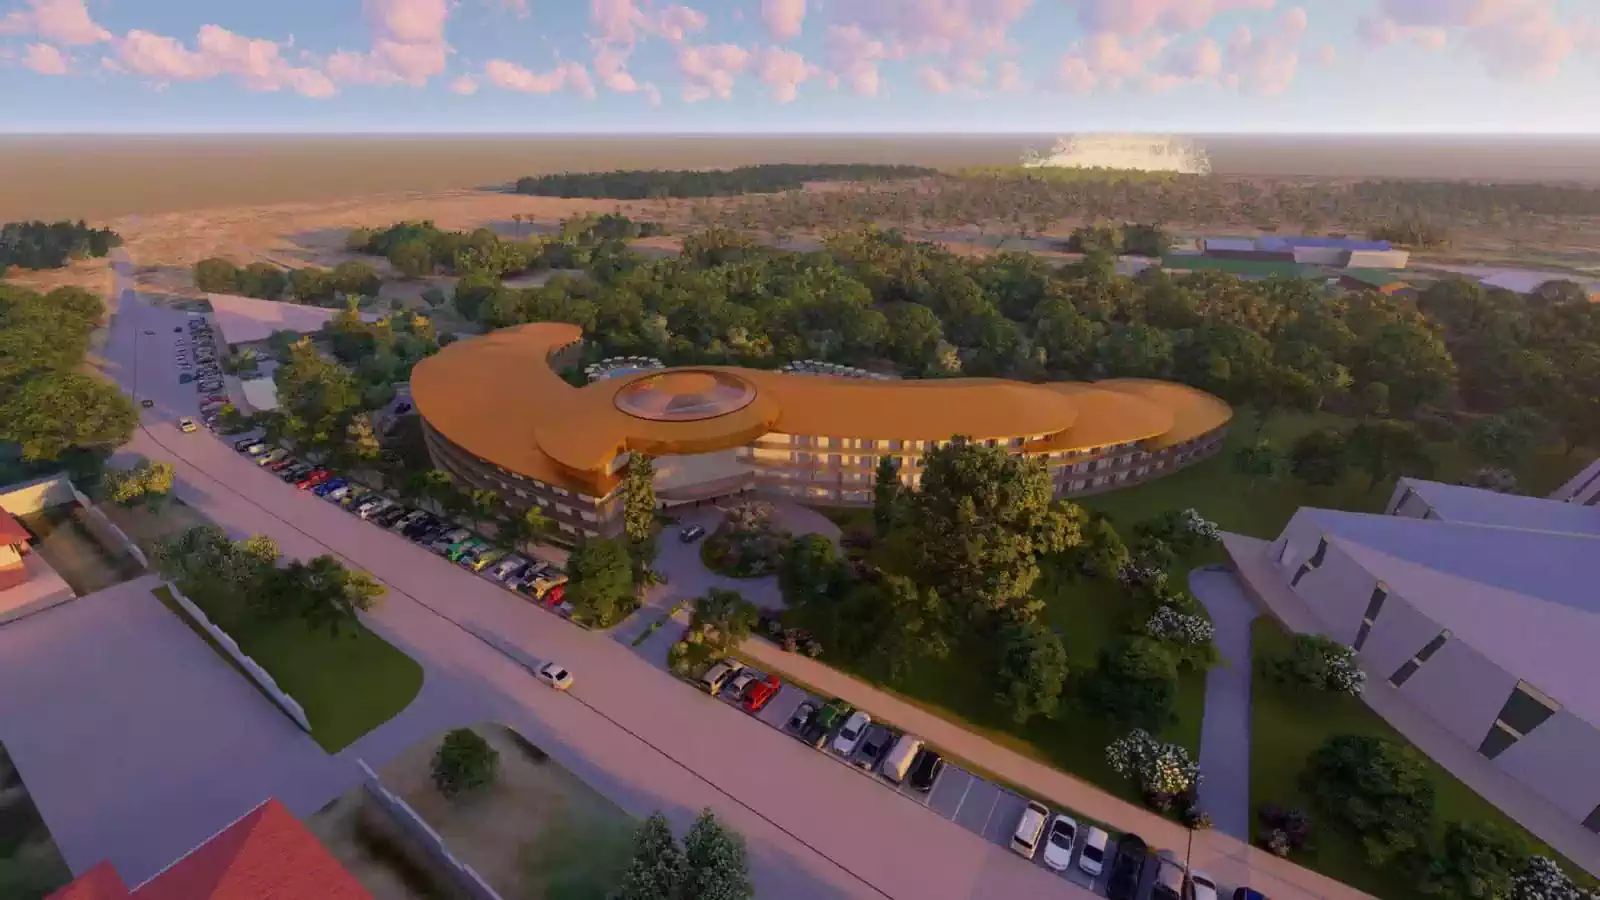 Curved sloping luxurious 250 room hotel immersed in trees in tourist resort designed by Harare architect